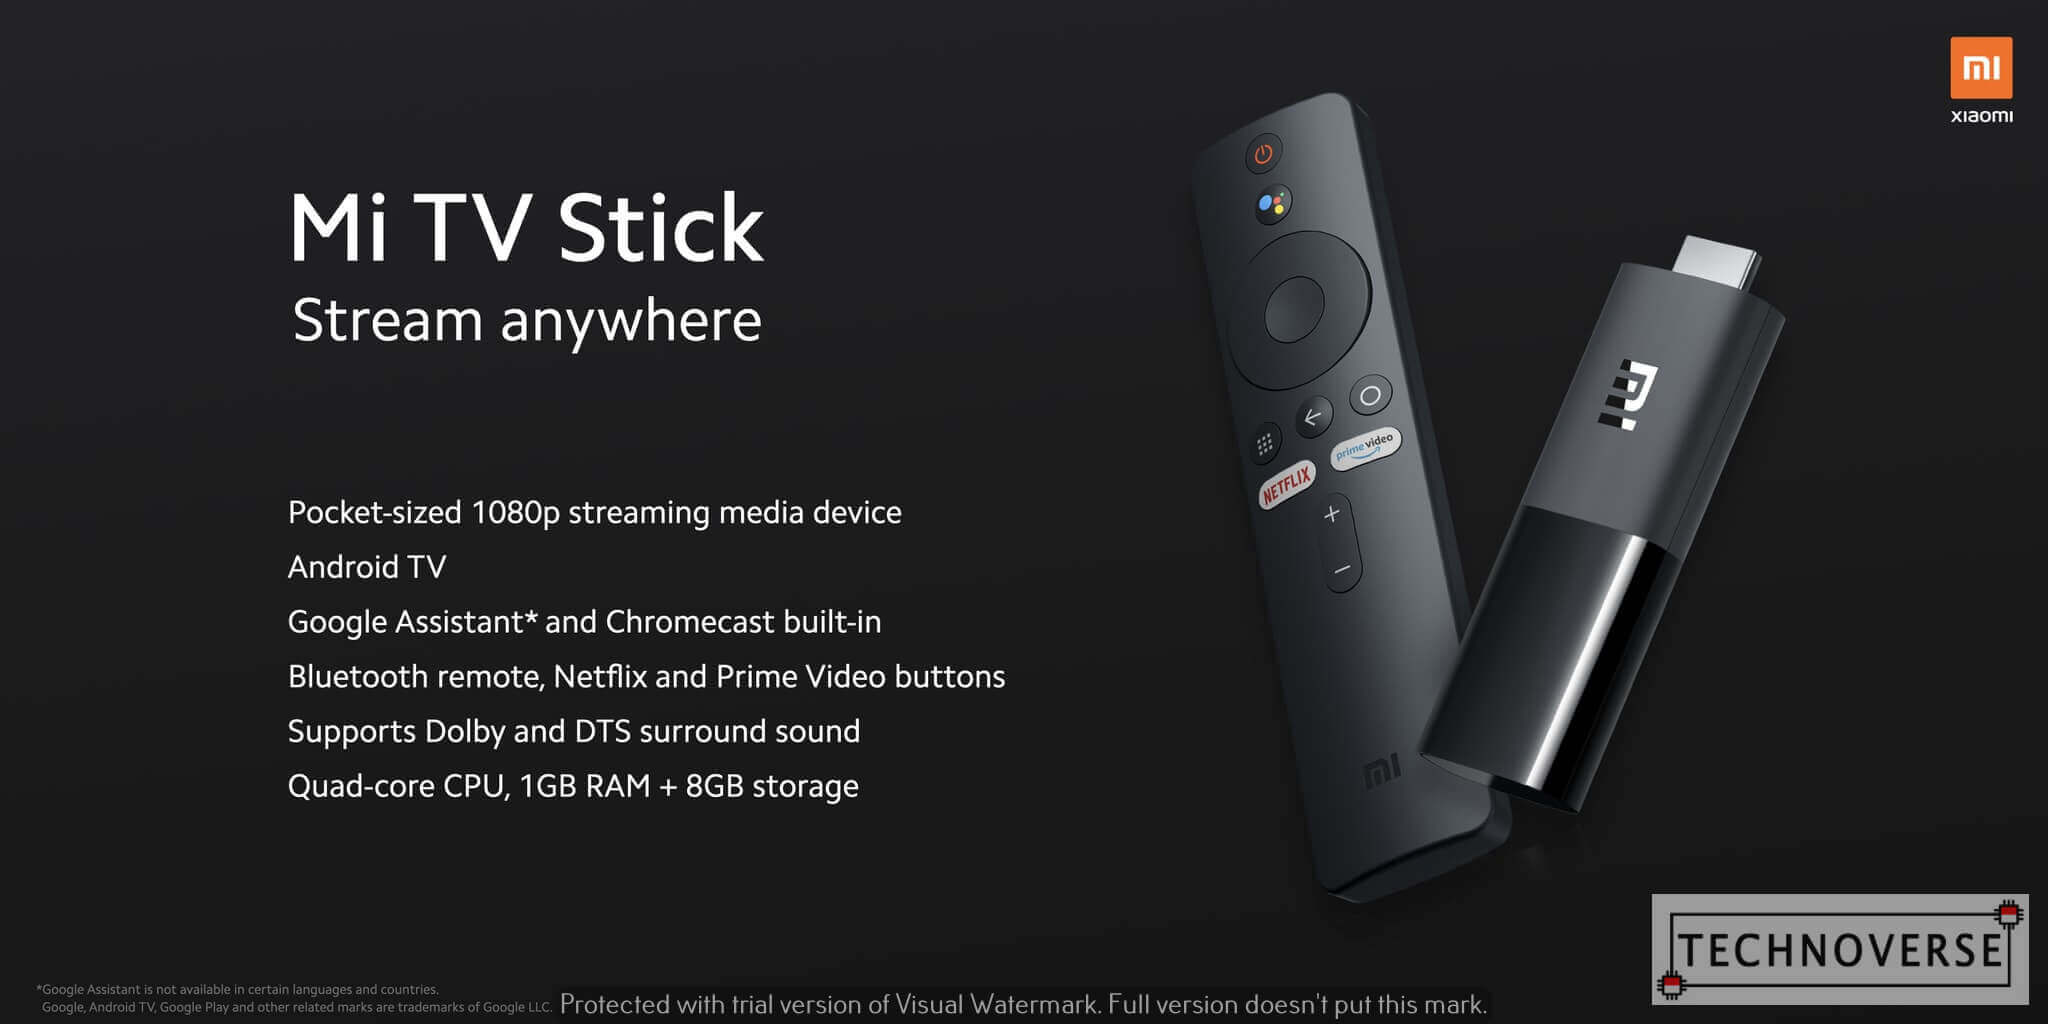 With Xiaomi's Mi TV Stick turn your dumb TV into a smarter one at Rs 2,799